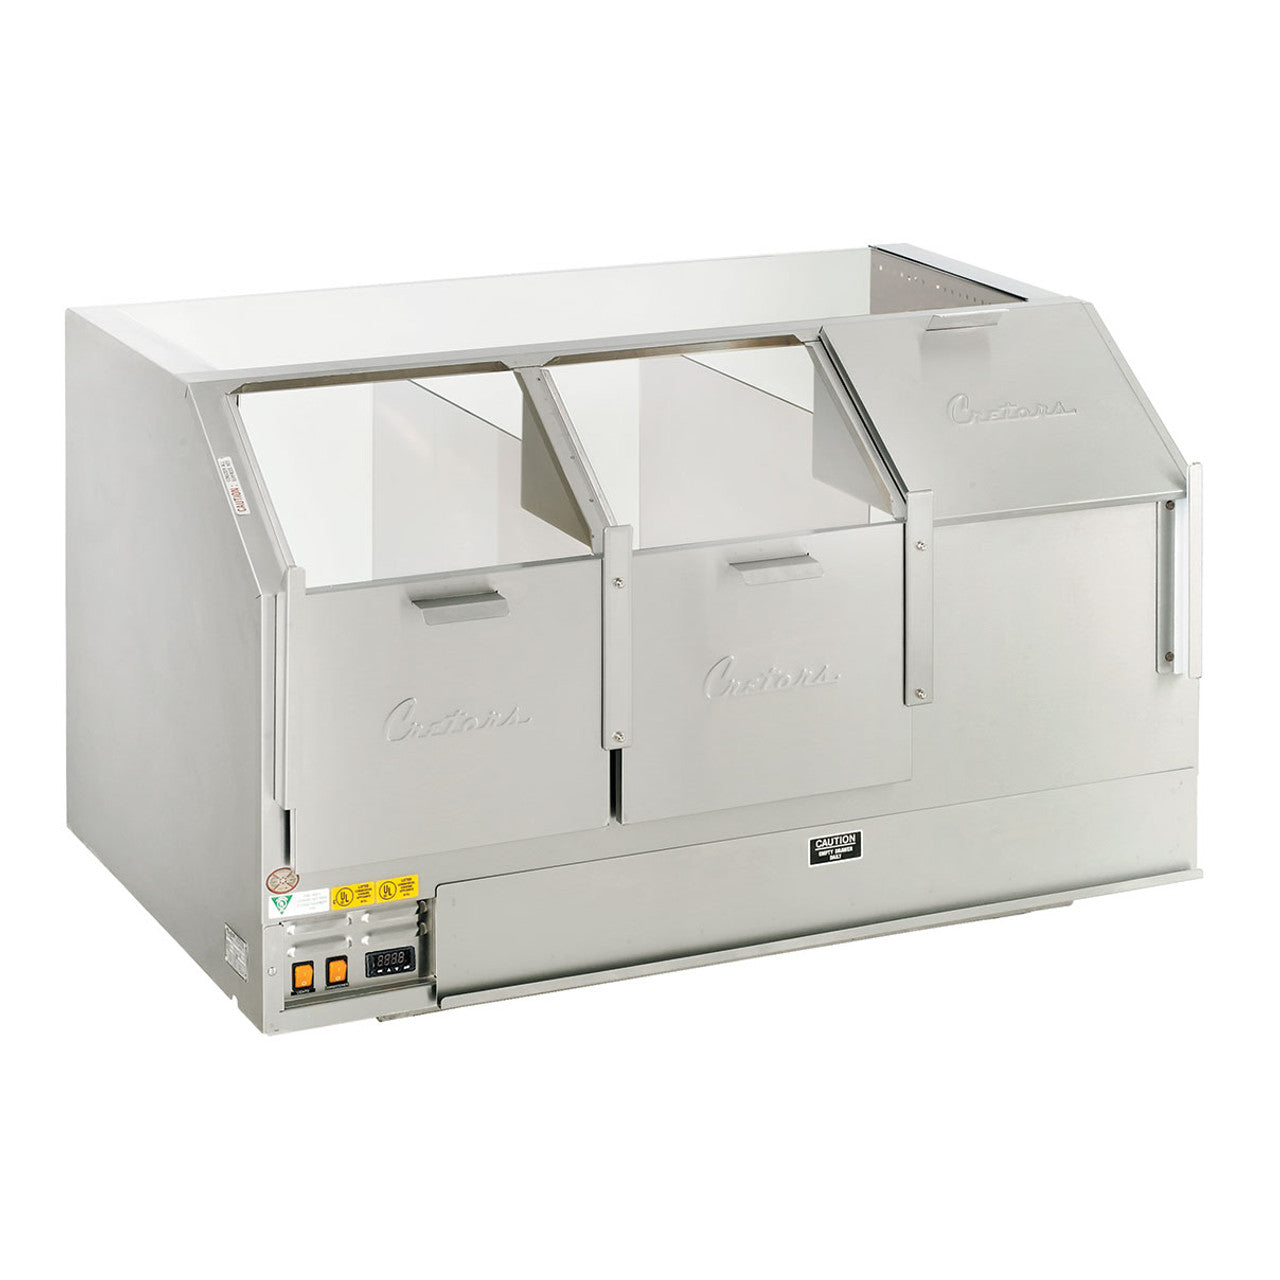 Cretors 48 Counter Showcase Cornditioner Cabinet Three Door for displaying and storing popcorn, as well as keeping it warm